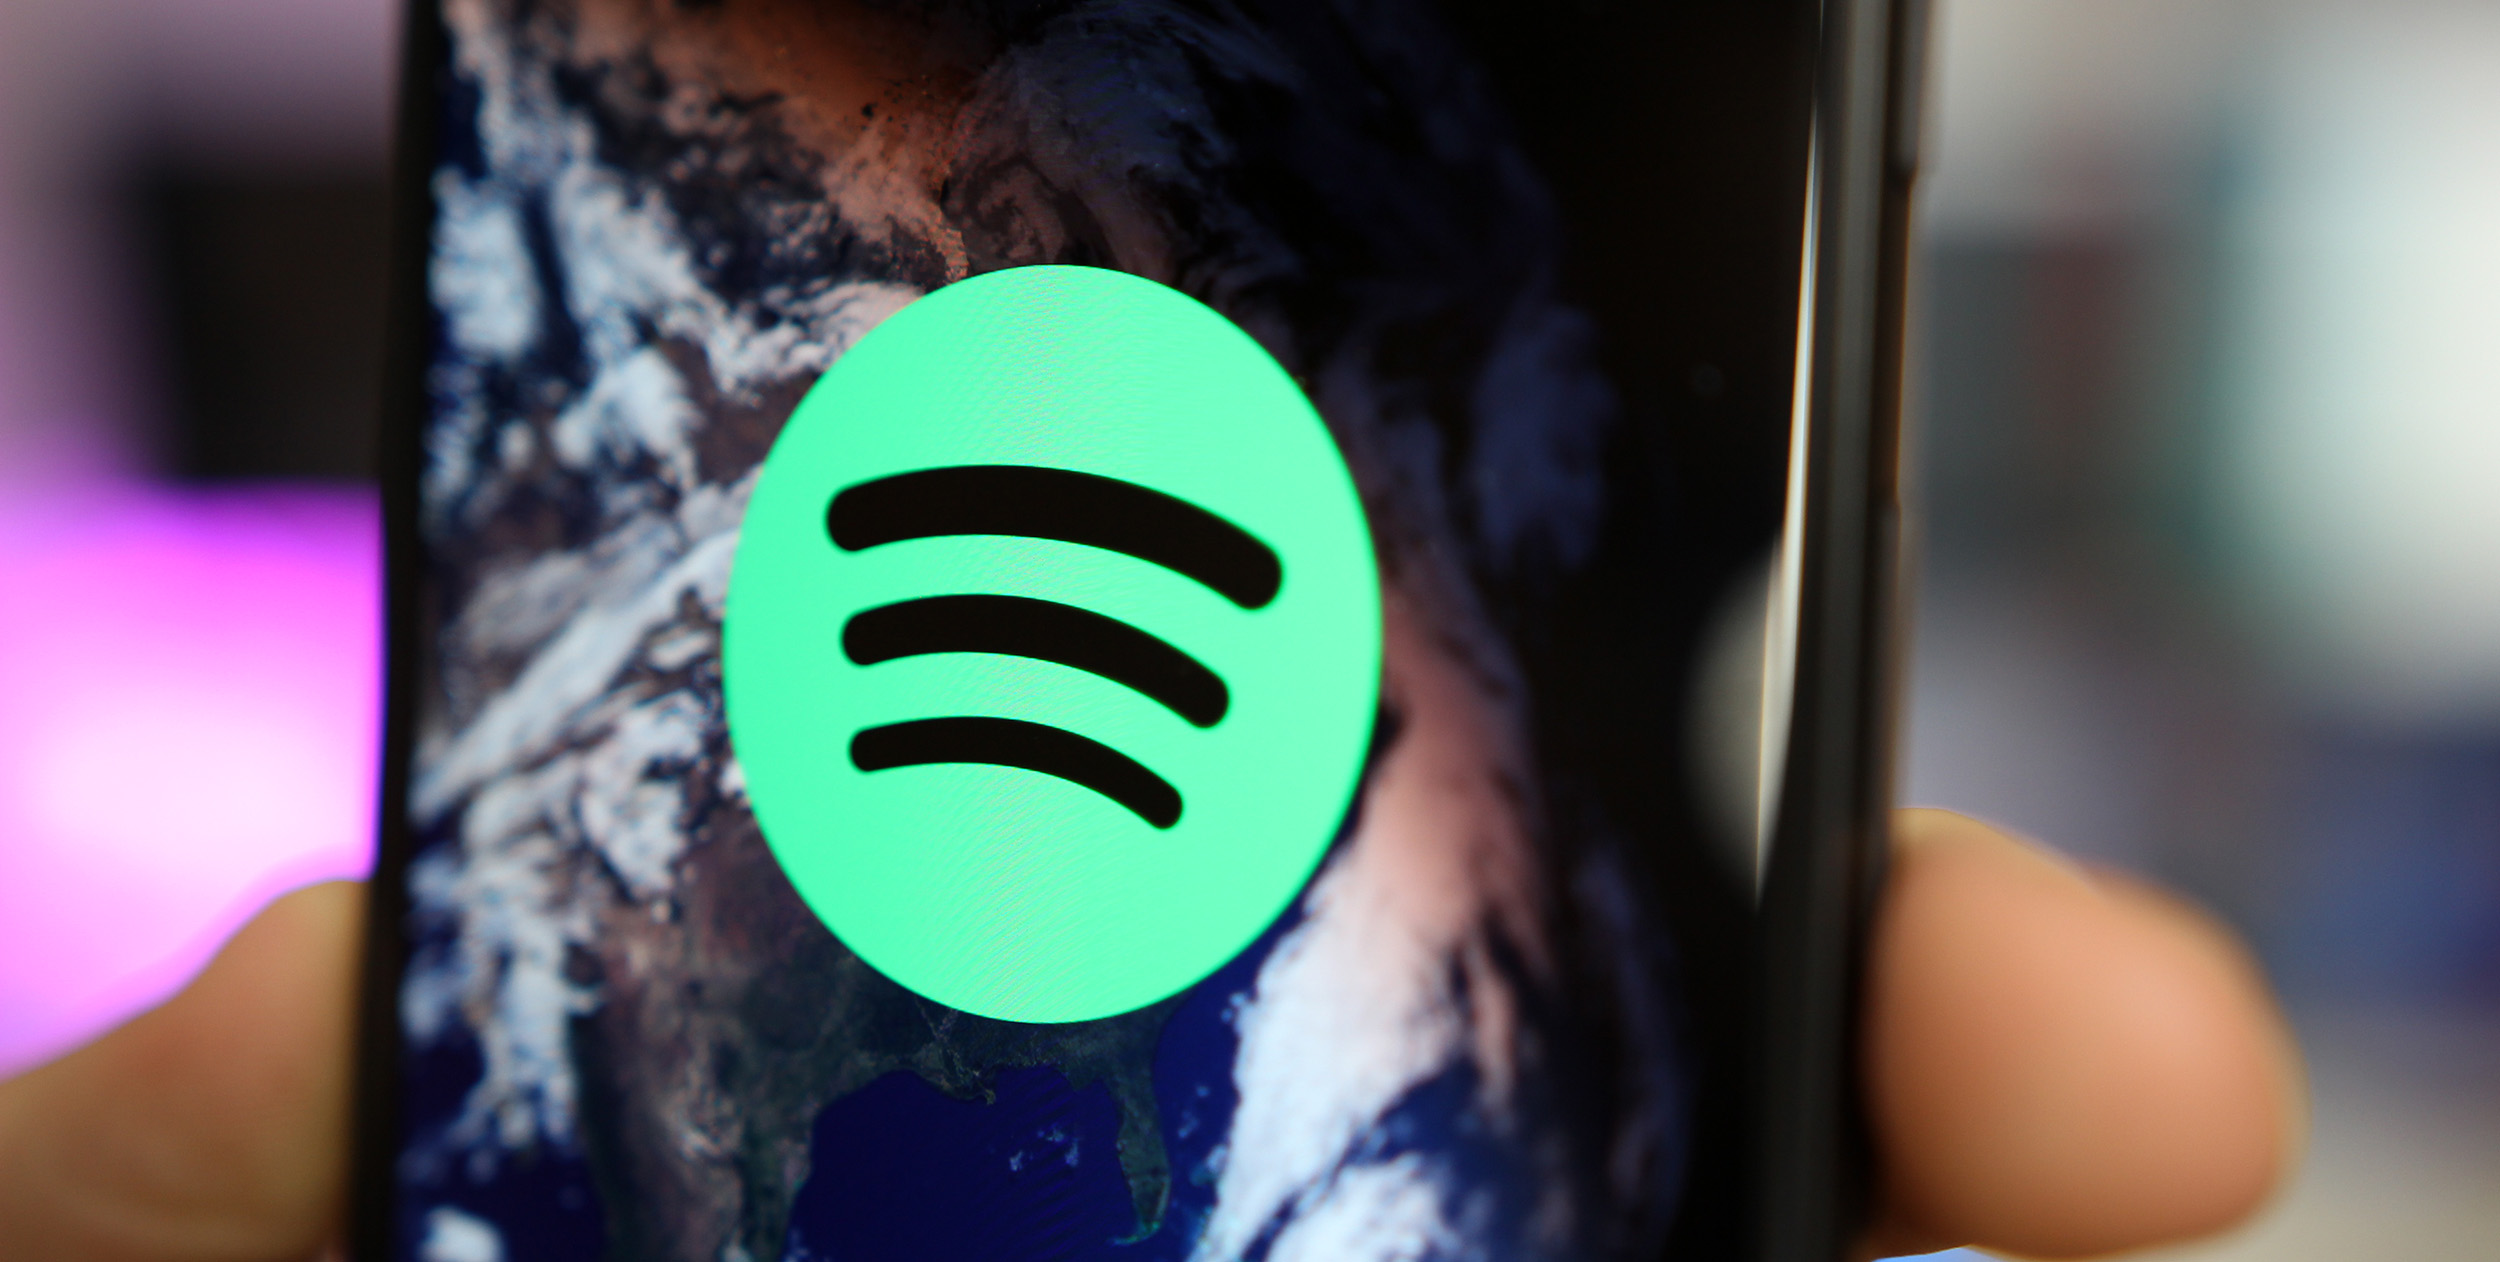 how to get free spotify premium samsung